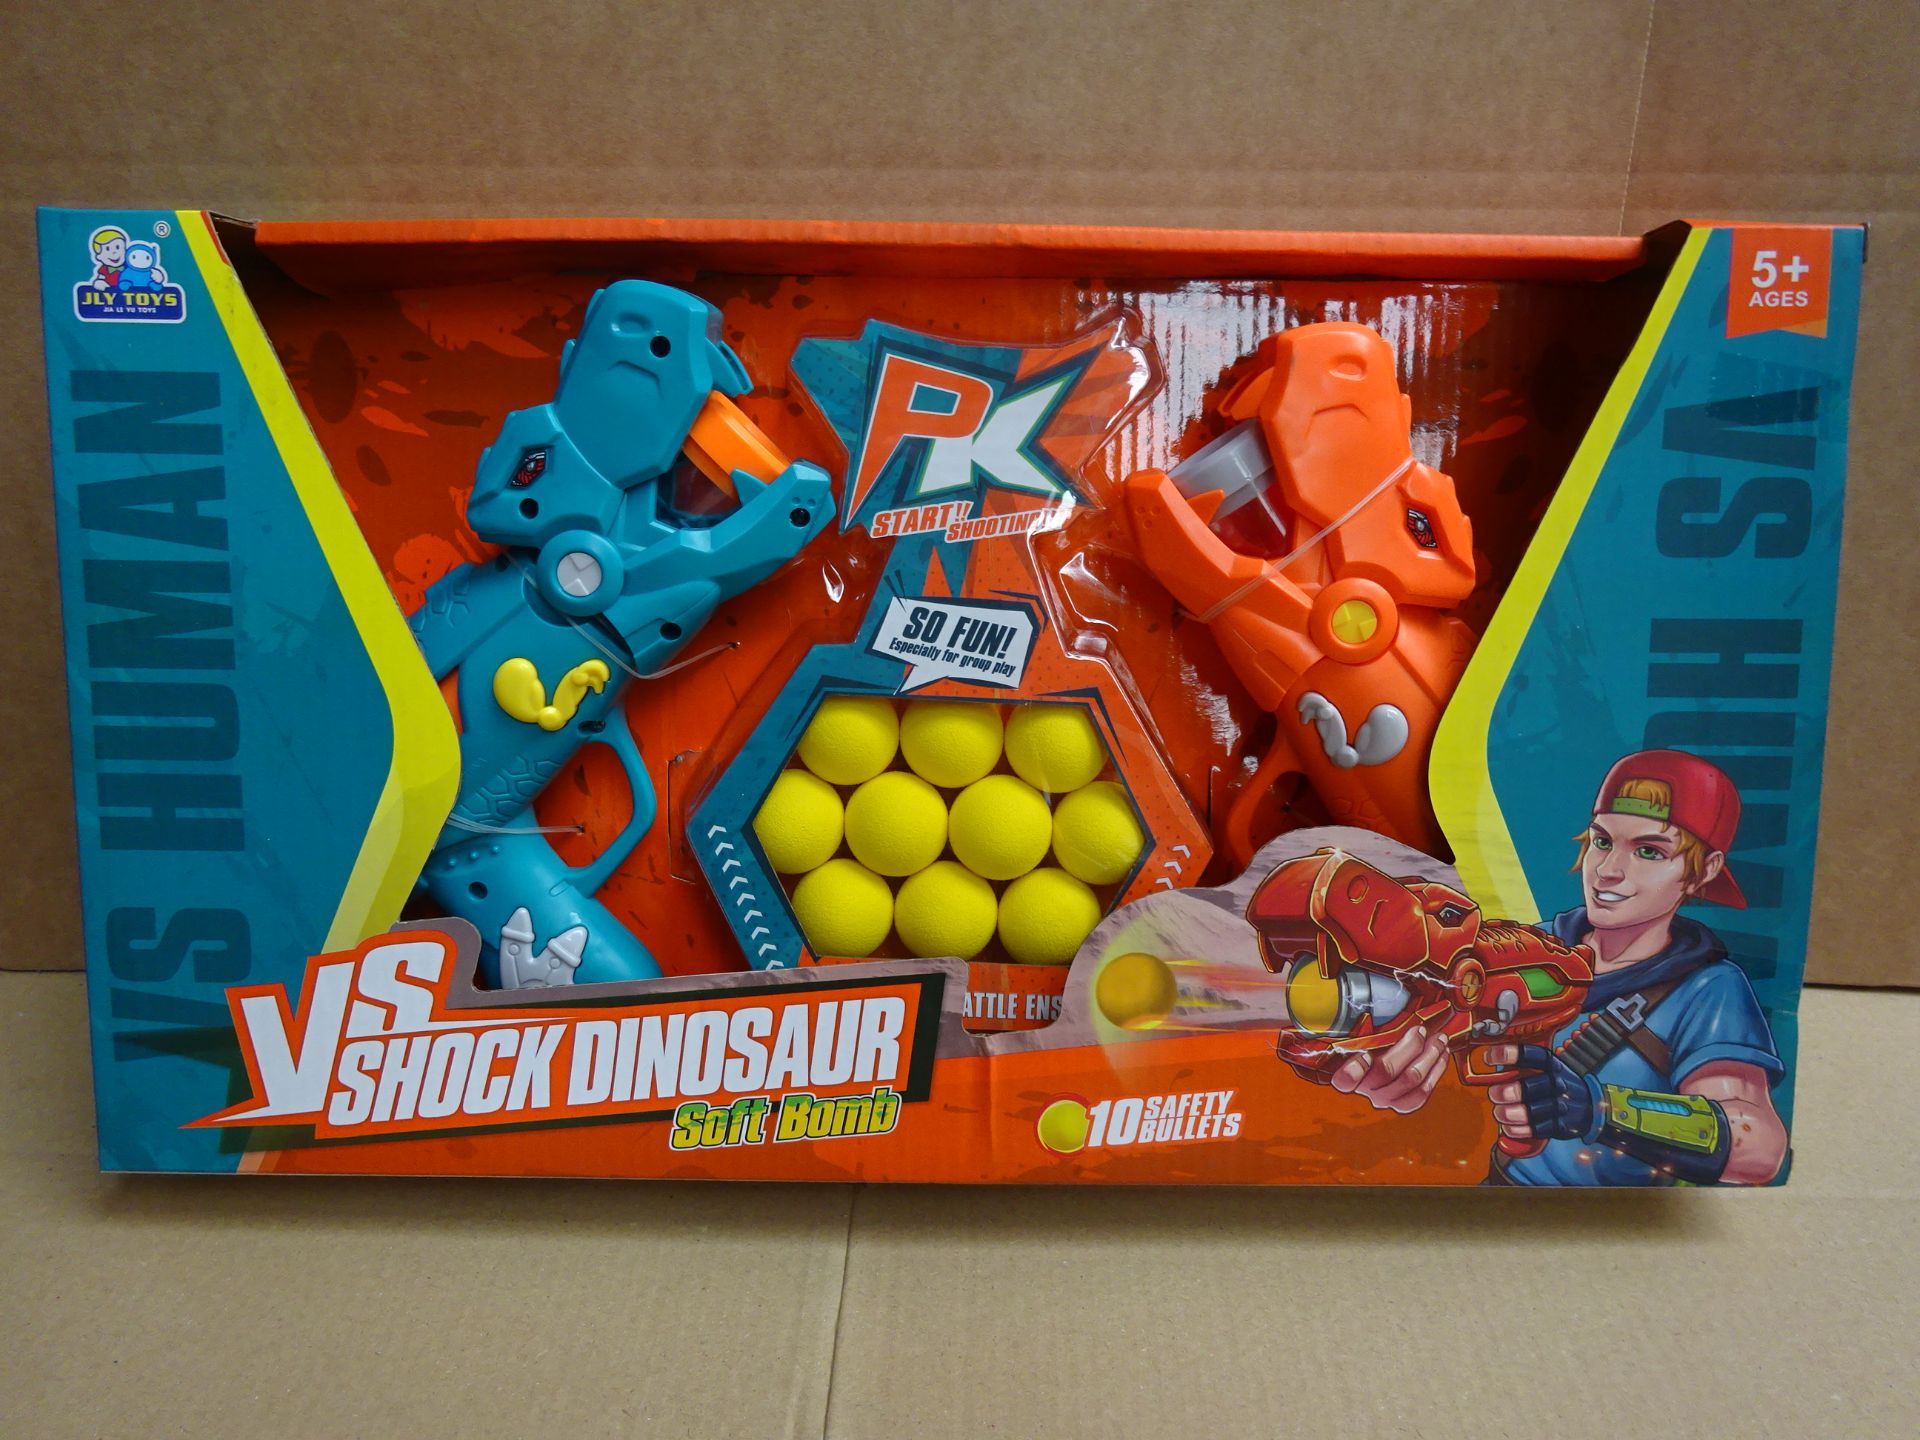 VS SHOCK DINOSAUR SOFT BOMB SHOOTERS WITH 10 SOFT BULLETS